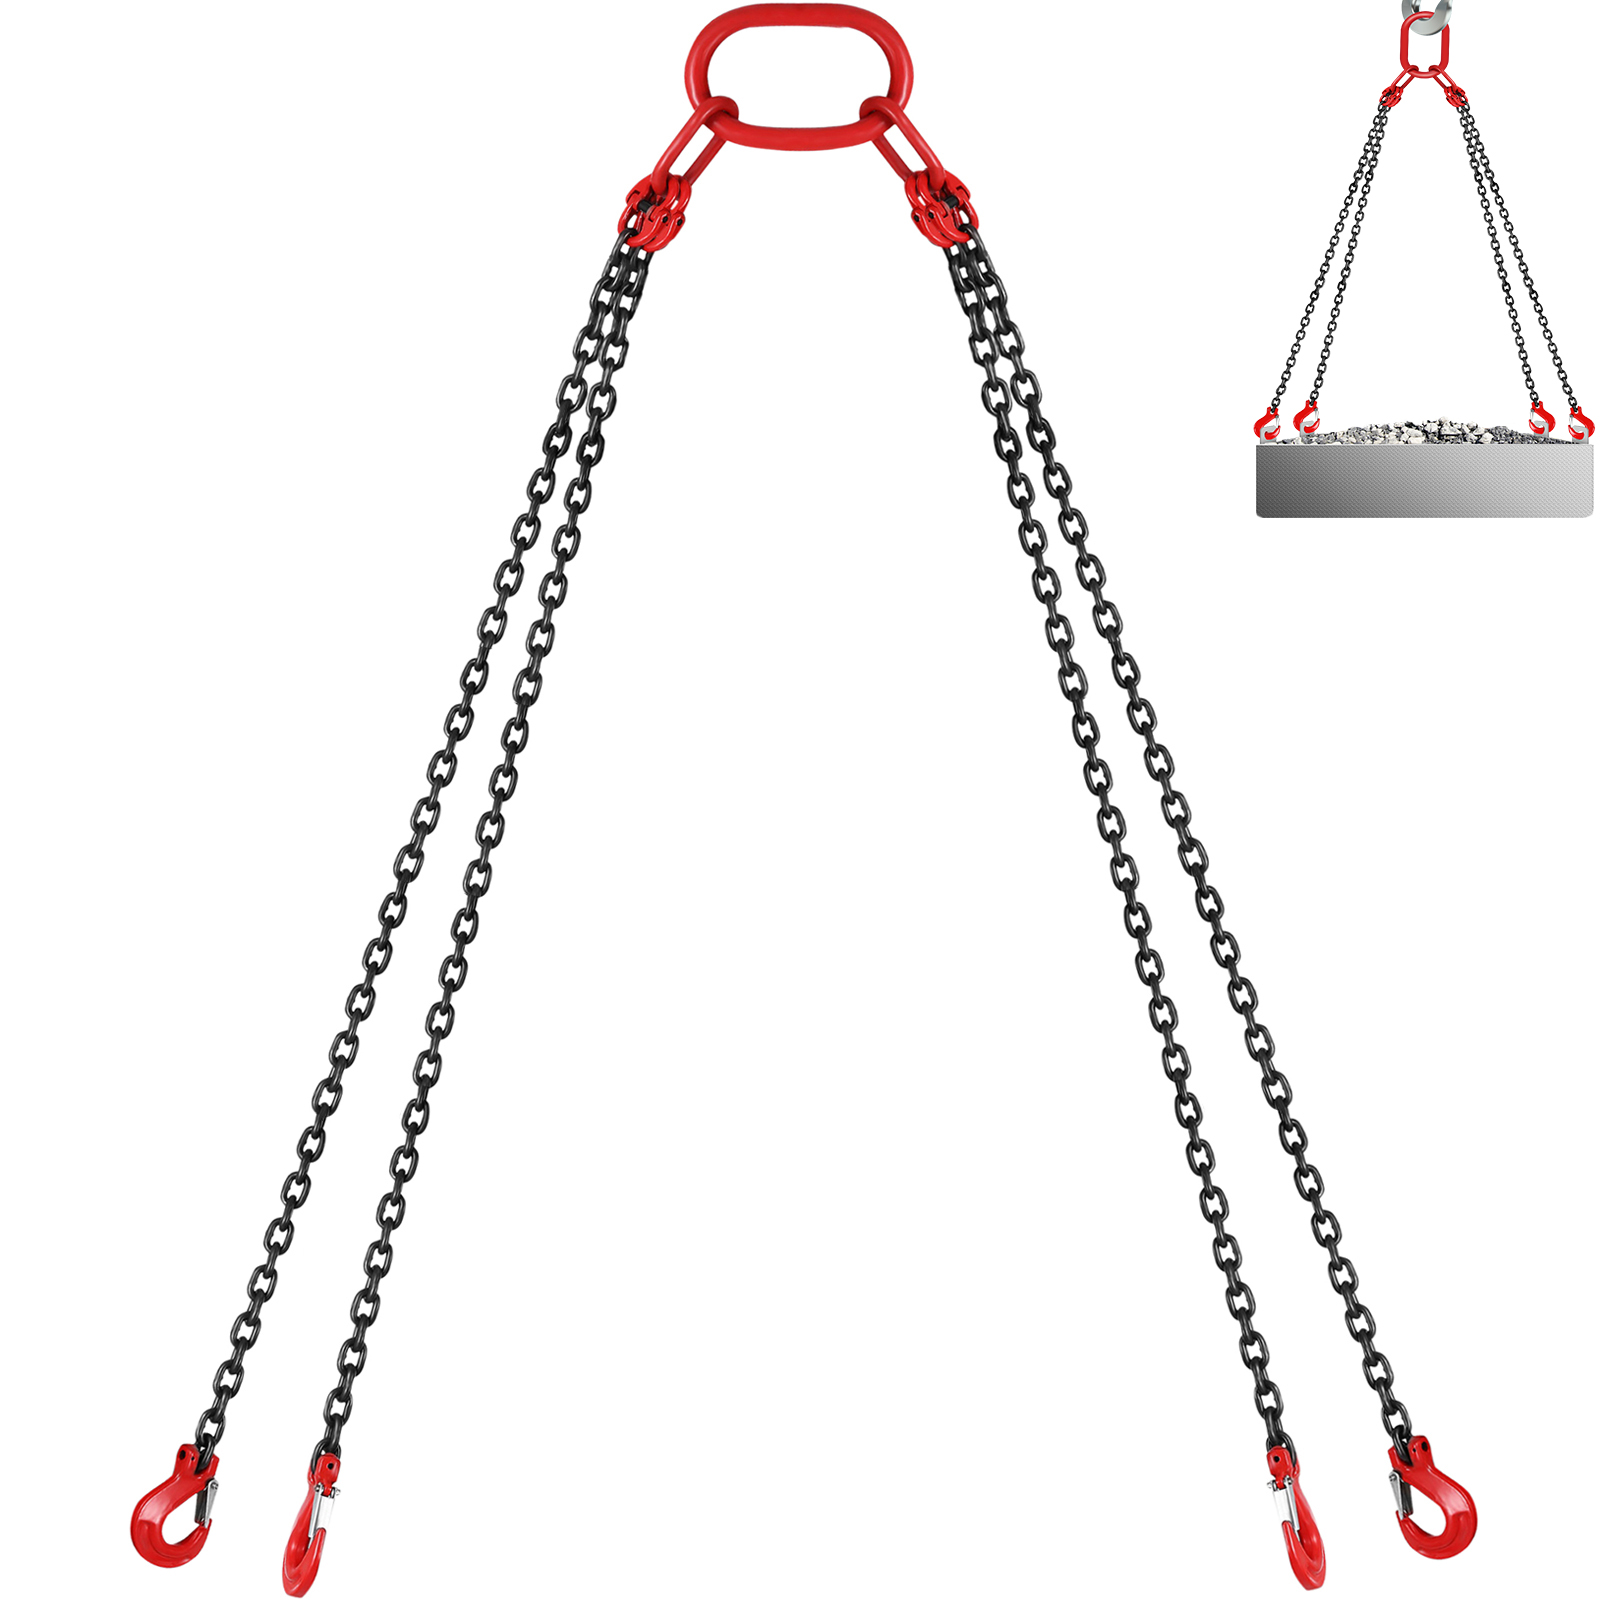 VEVOR 10ft Chain Sling With 4 Legs 5t Capacity Wear-resistant Tackle With Shortners